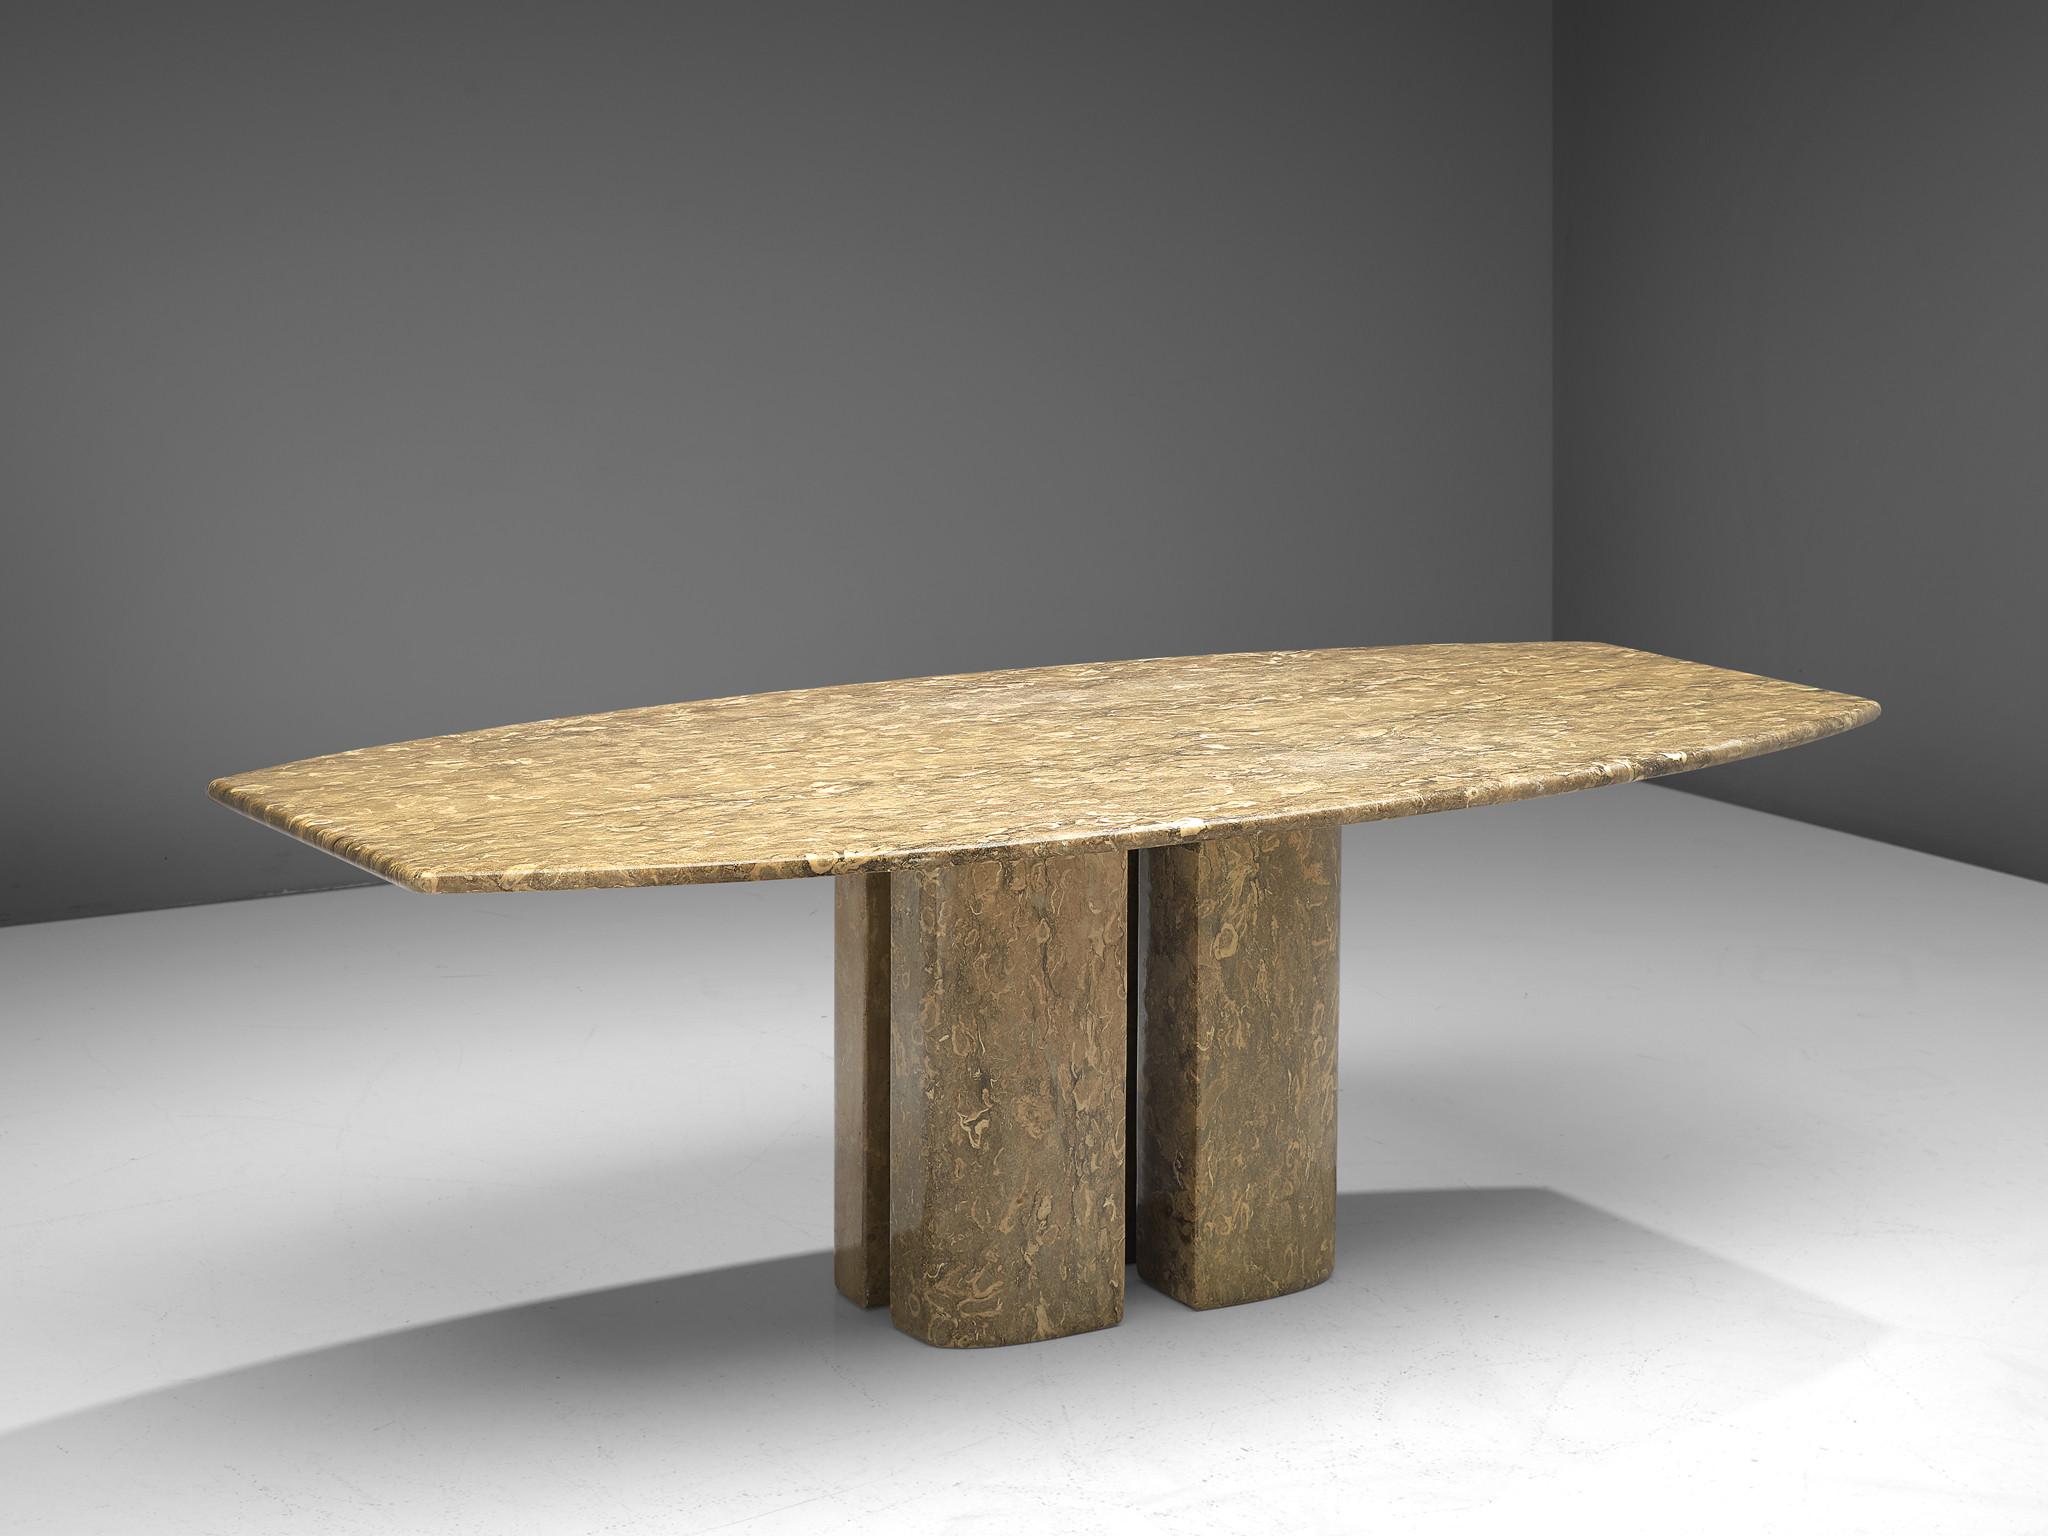 Giancarlo Sala for Marmi Sala&Co, pedestal table, marble, Italy, 1970s

This postmodern marble table is designed by Giancarlo Sala and is a striking embodiment of Italian design from the 1970s. Its imposing and almost monumental appearance makes it